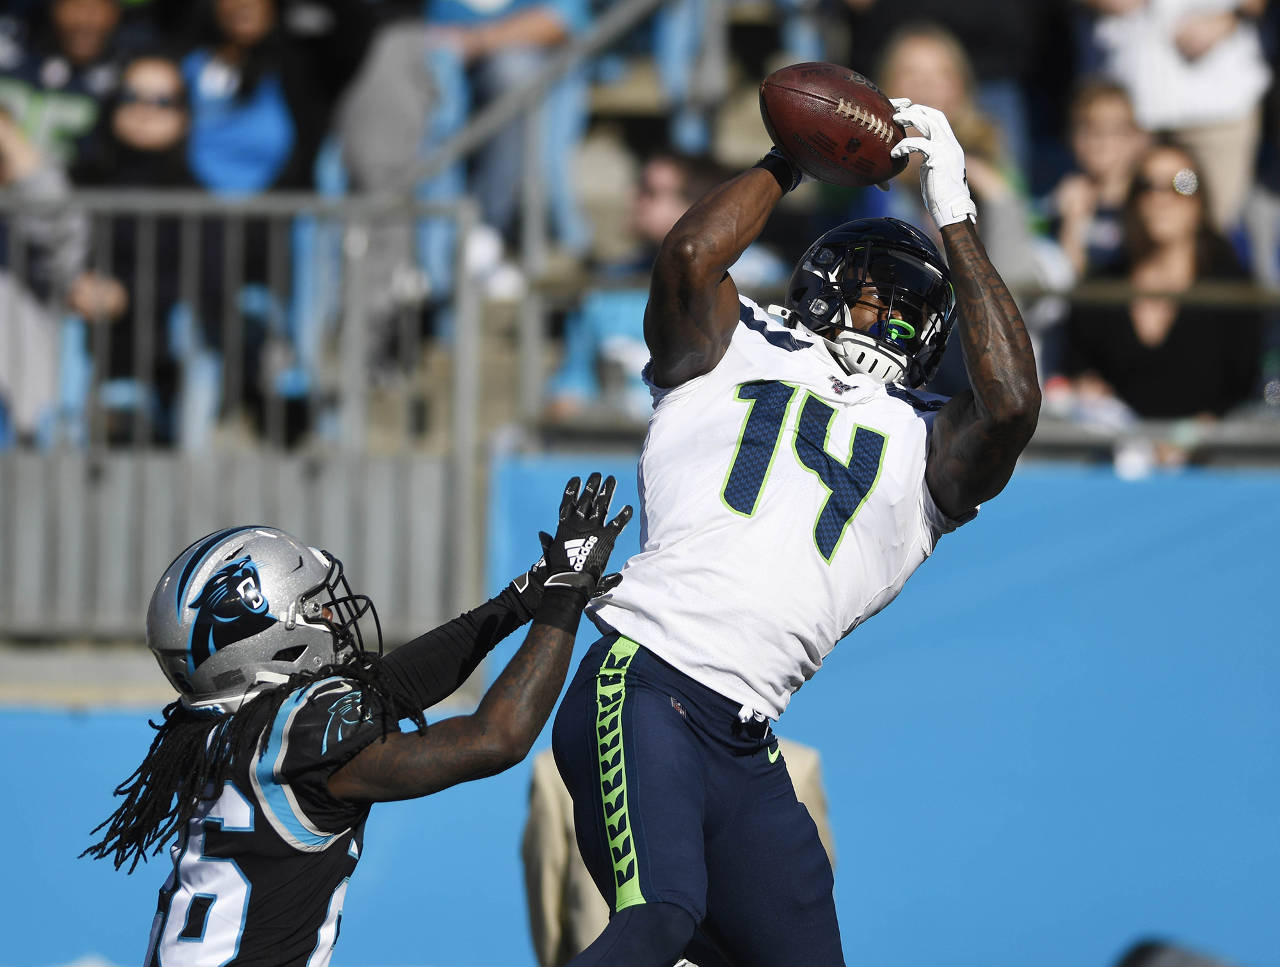 Seattle Seahawks wide receiver D.K. Metcalf (14) reaches up for a touchdown reception past Carolina Panthers cornerback Donte Jackson (26) during the first half at Bank of America Stadium on Sunday. (David T. Foster III/Charlotte Observer/TNS)